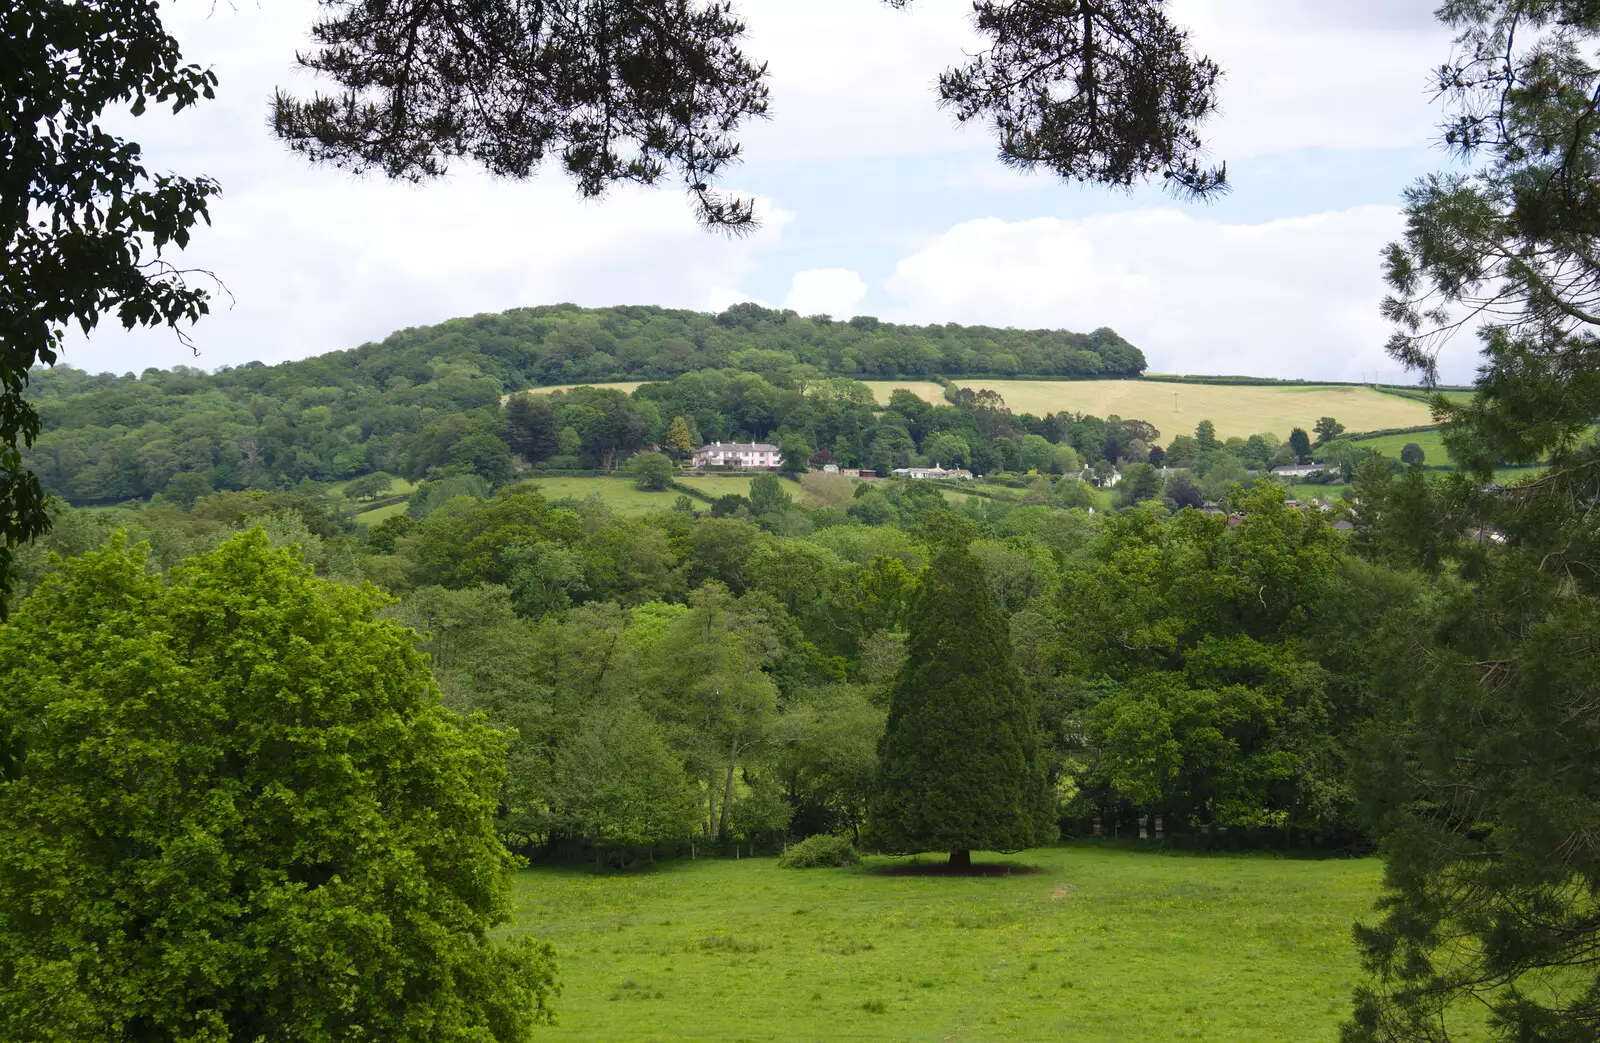 Another Devon view, from Chagford Lido and a Trip to Parke, Bovey Tracey, Devon - 25th May 2019